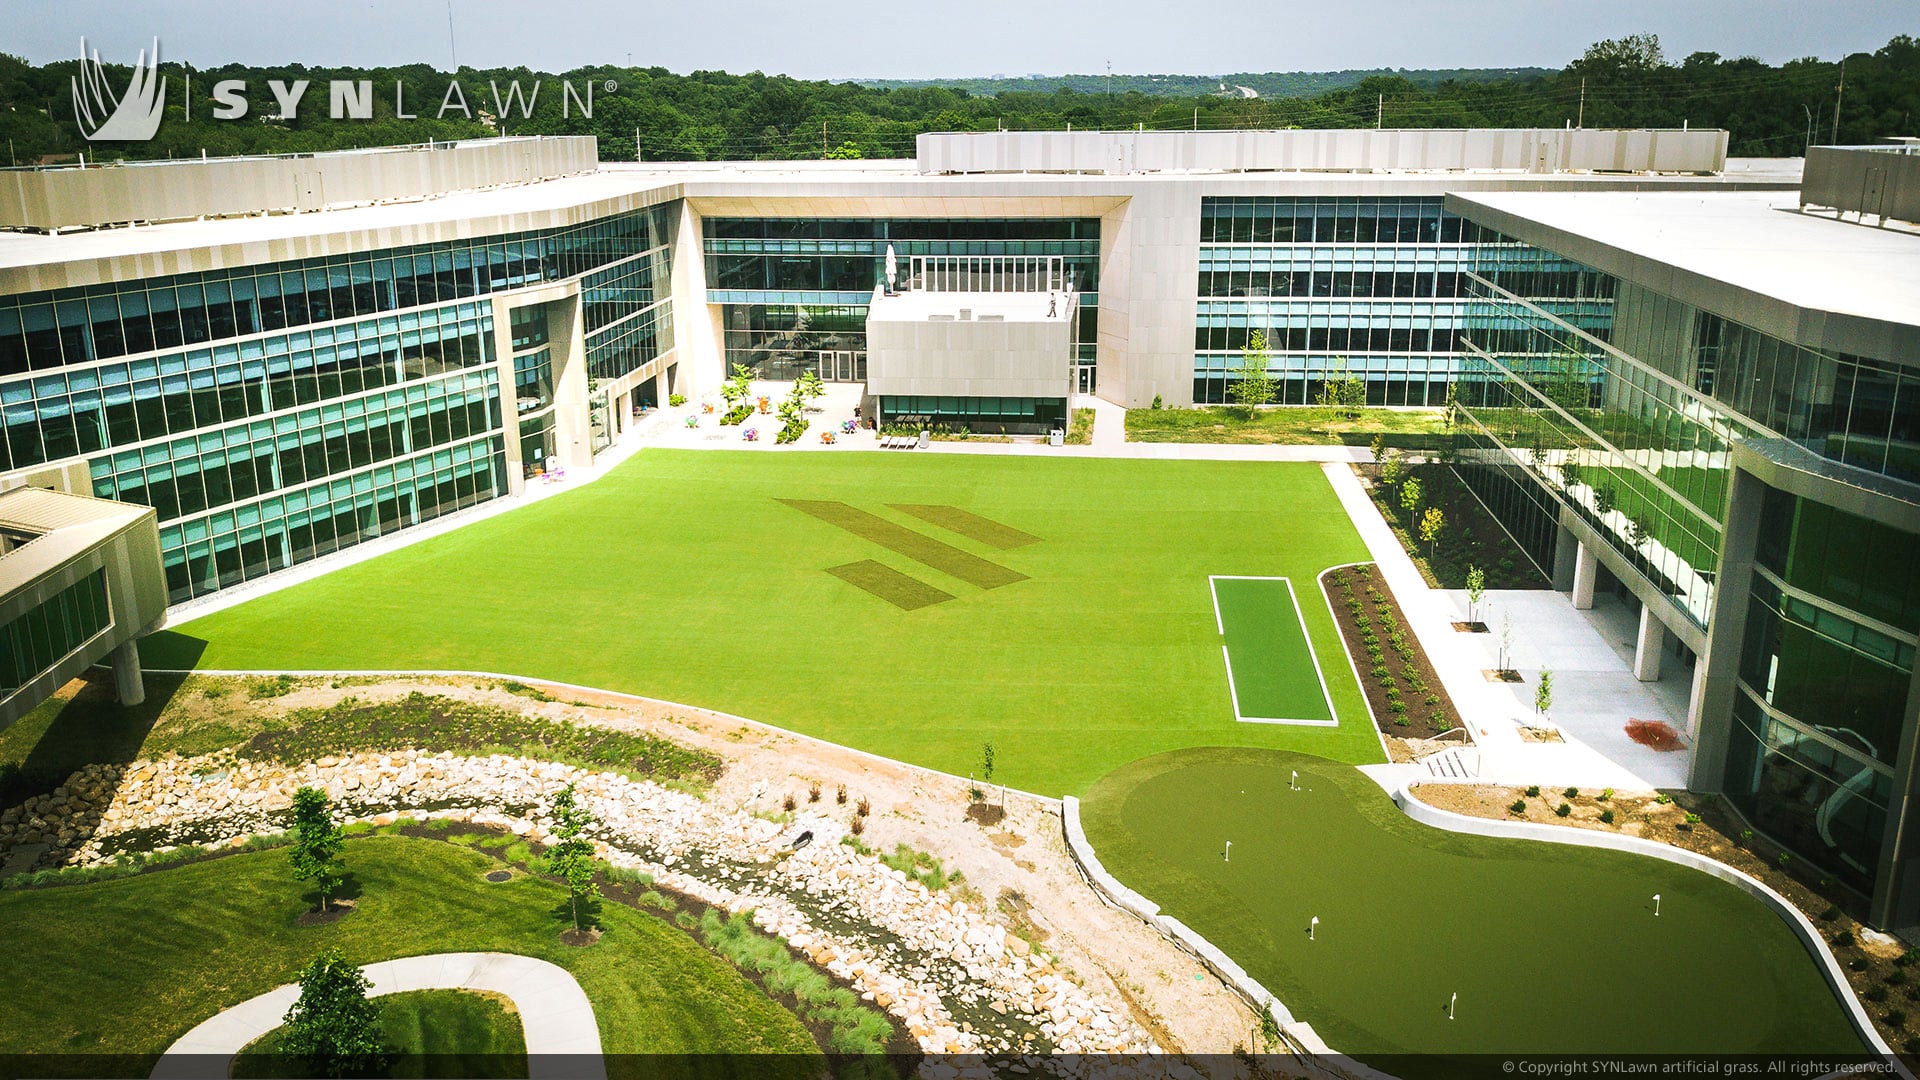 SYNLawn Jacksonville FL commercial artificial grass for office buildings campus courtyards